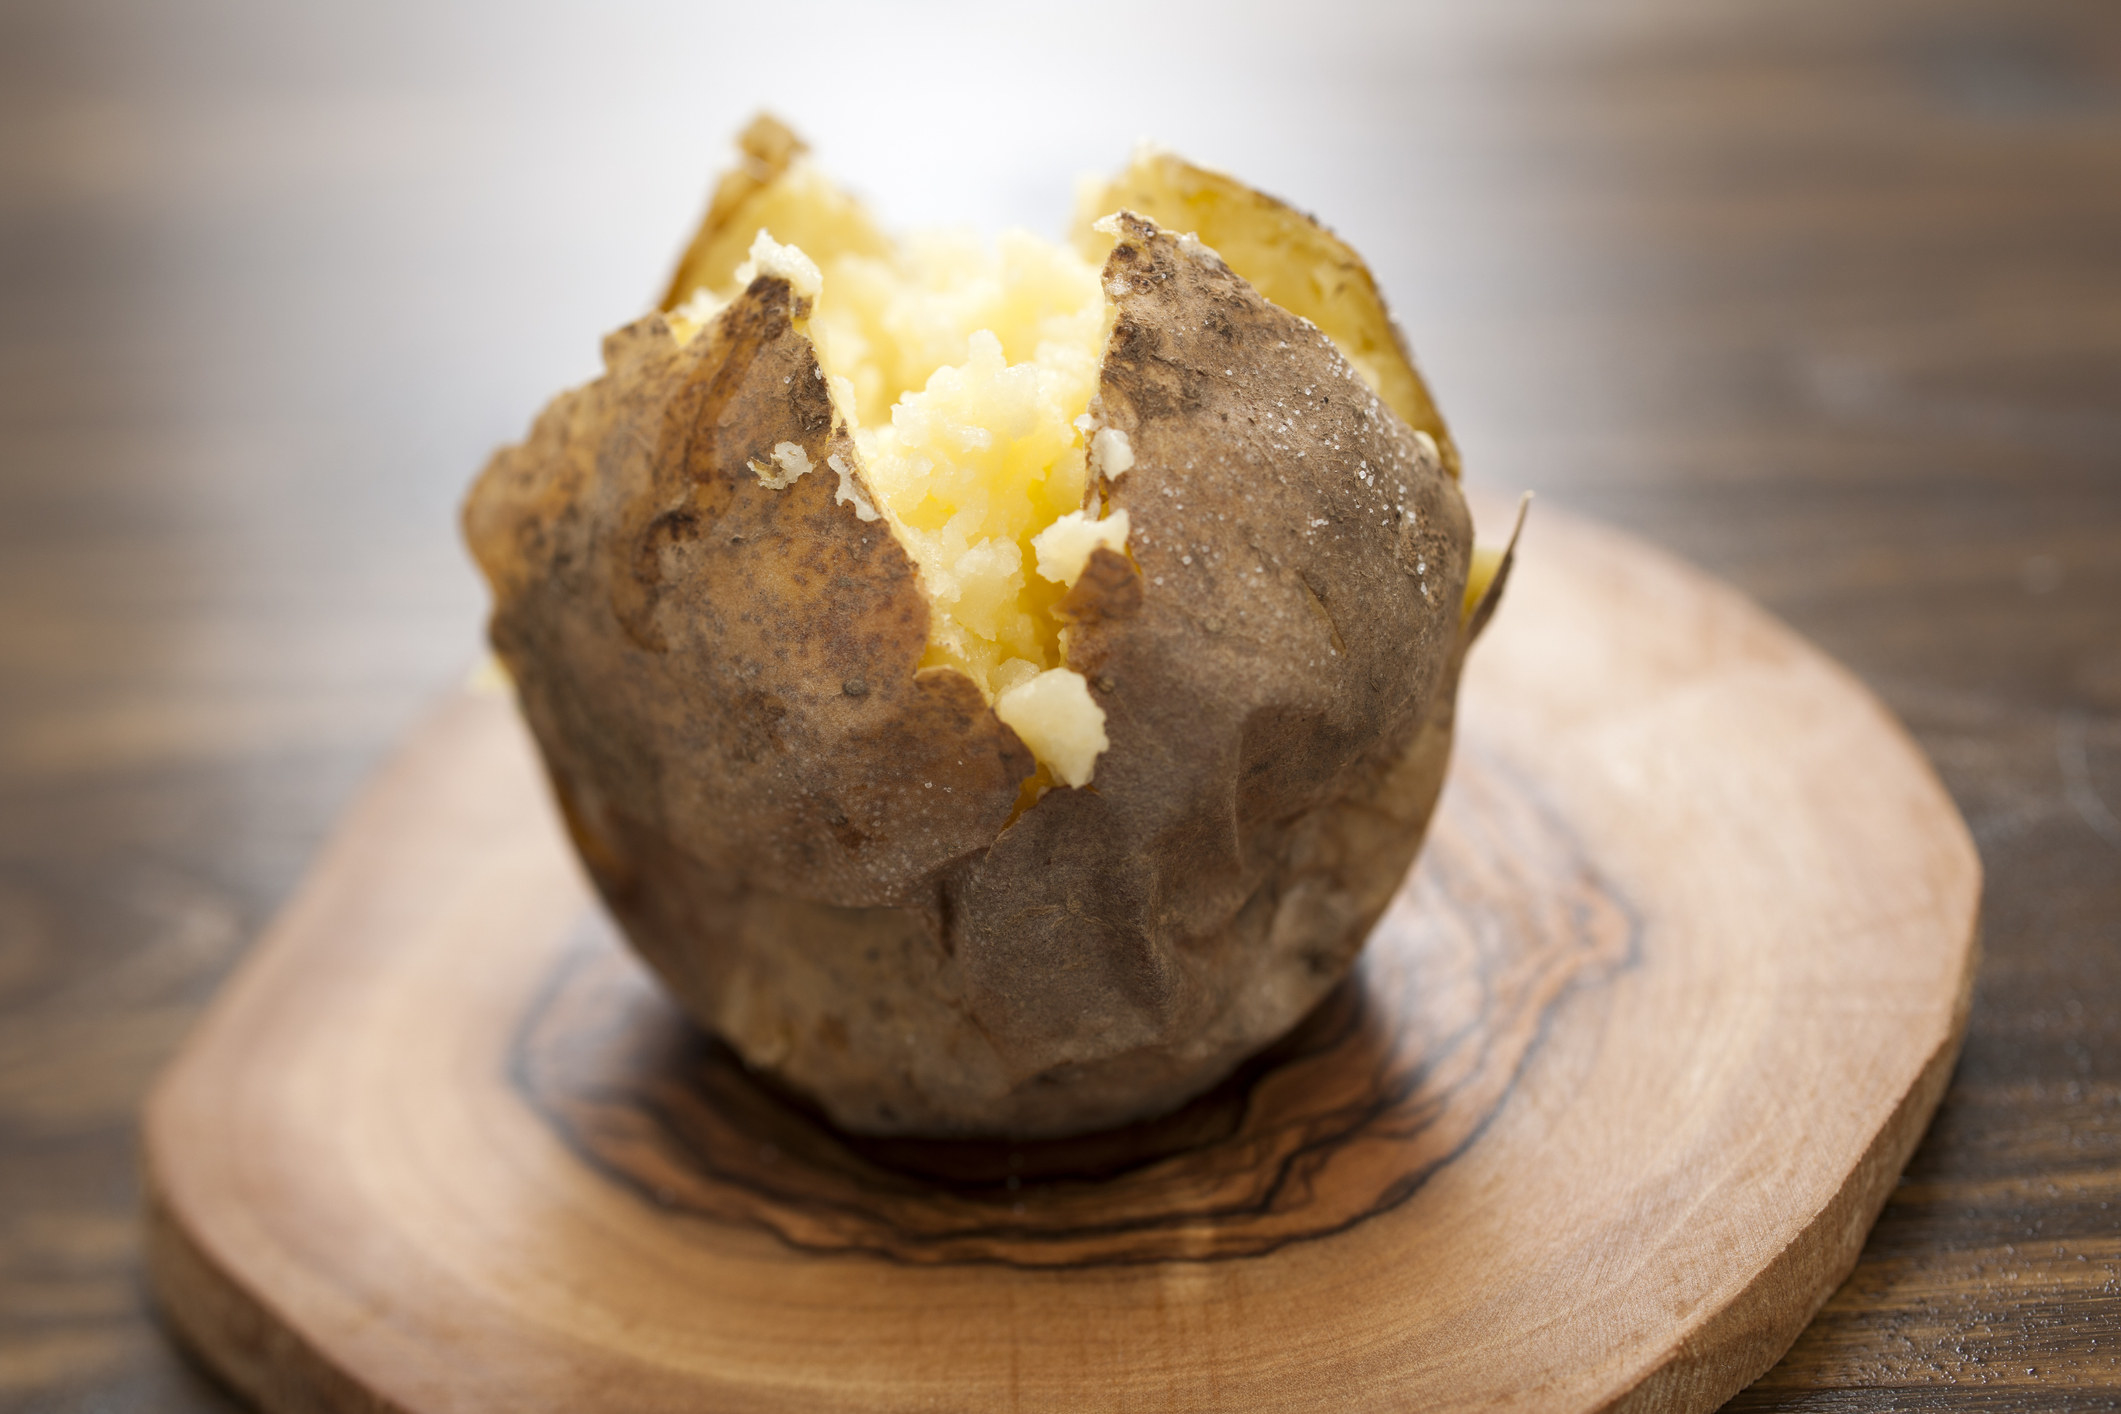 Plain hot baked potato with just butter.